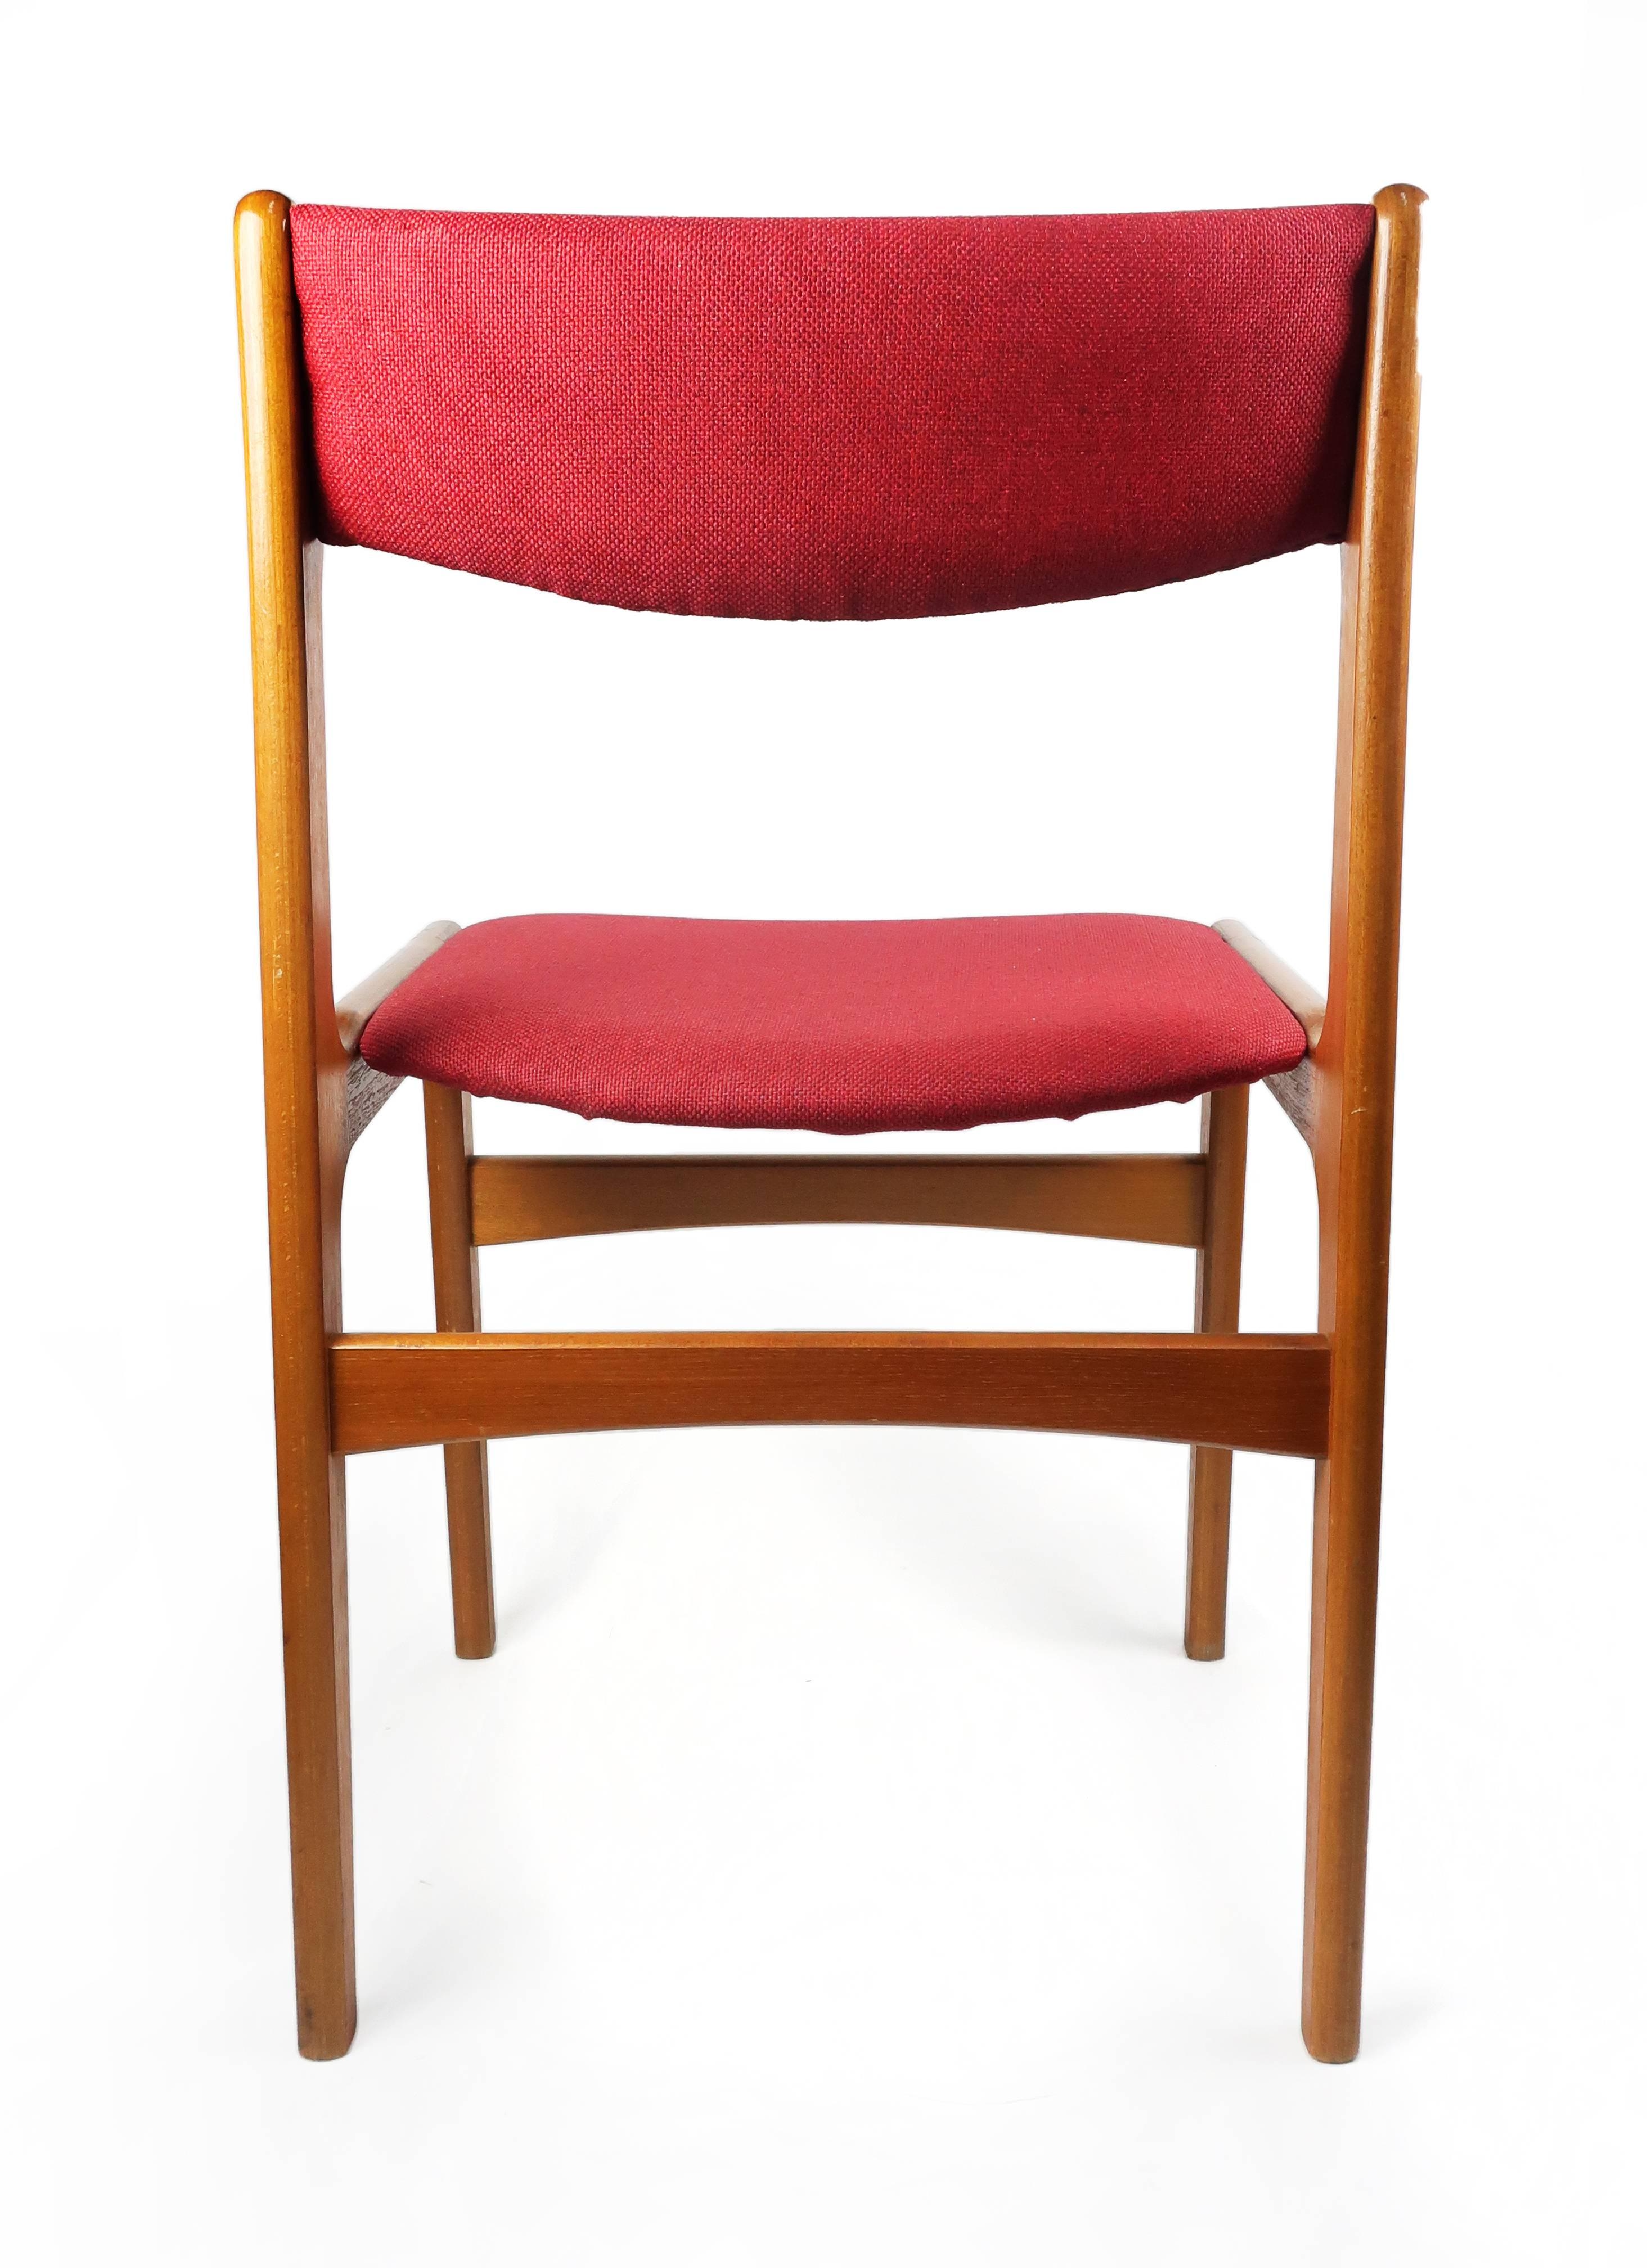 Pair of Danish Modern Dining Chairs by Erik Buch for Anderstrup Møbelfabrik 2